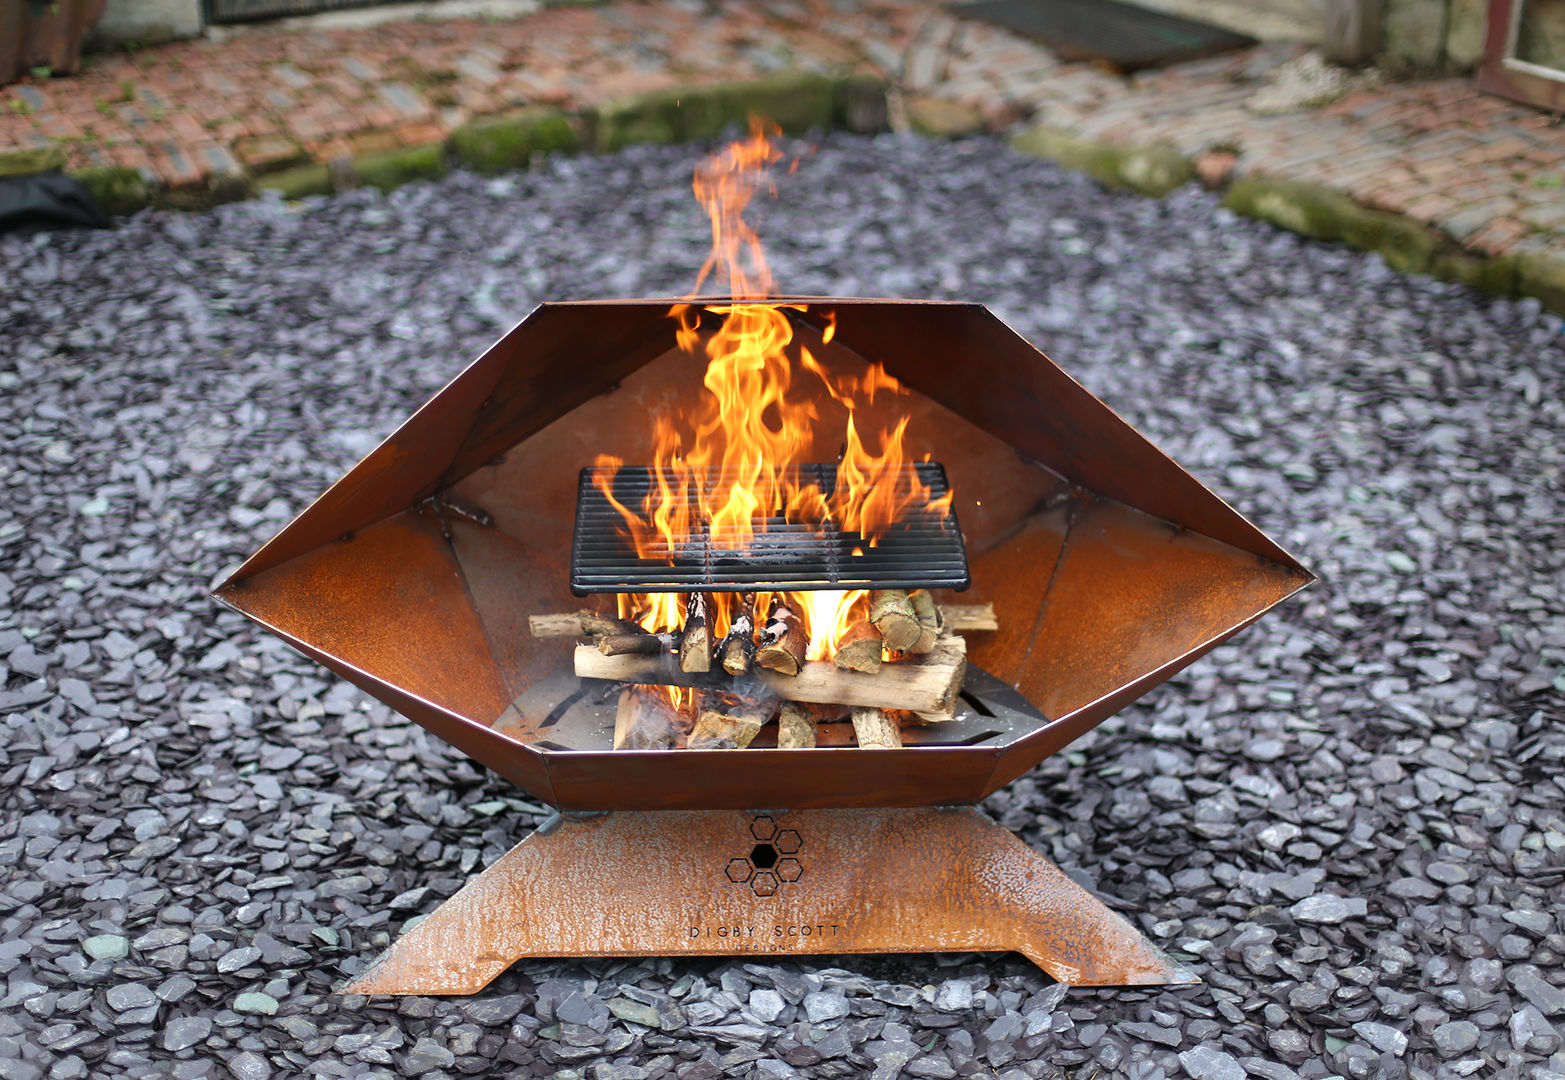 Sphenomegacorona Barbecue and Fire Pit Digby Scott Designs Modern garden Iron/Steel Fire pits & barbecues